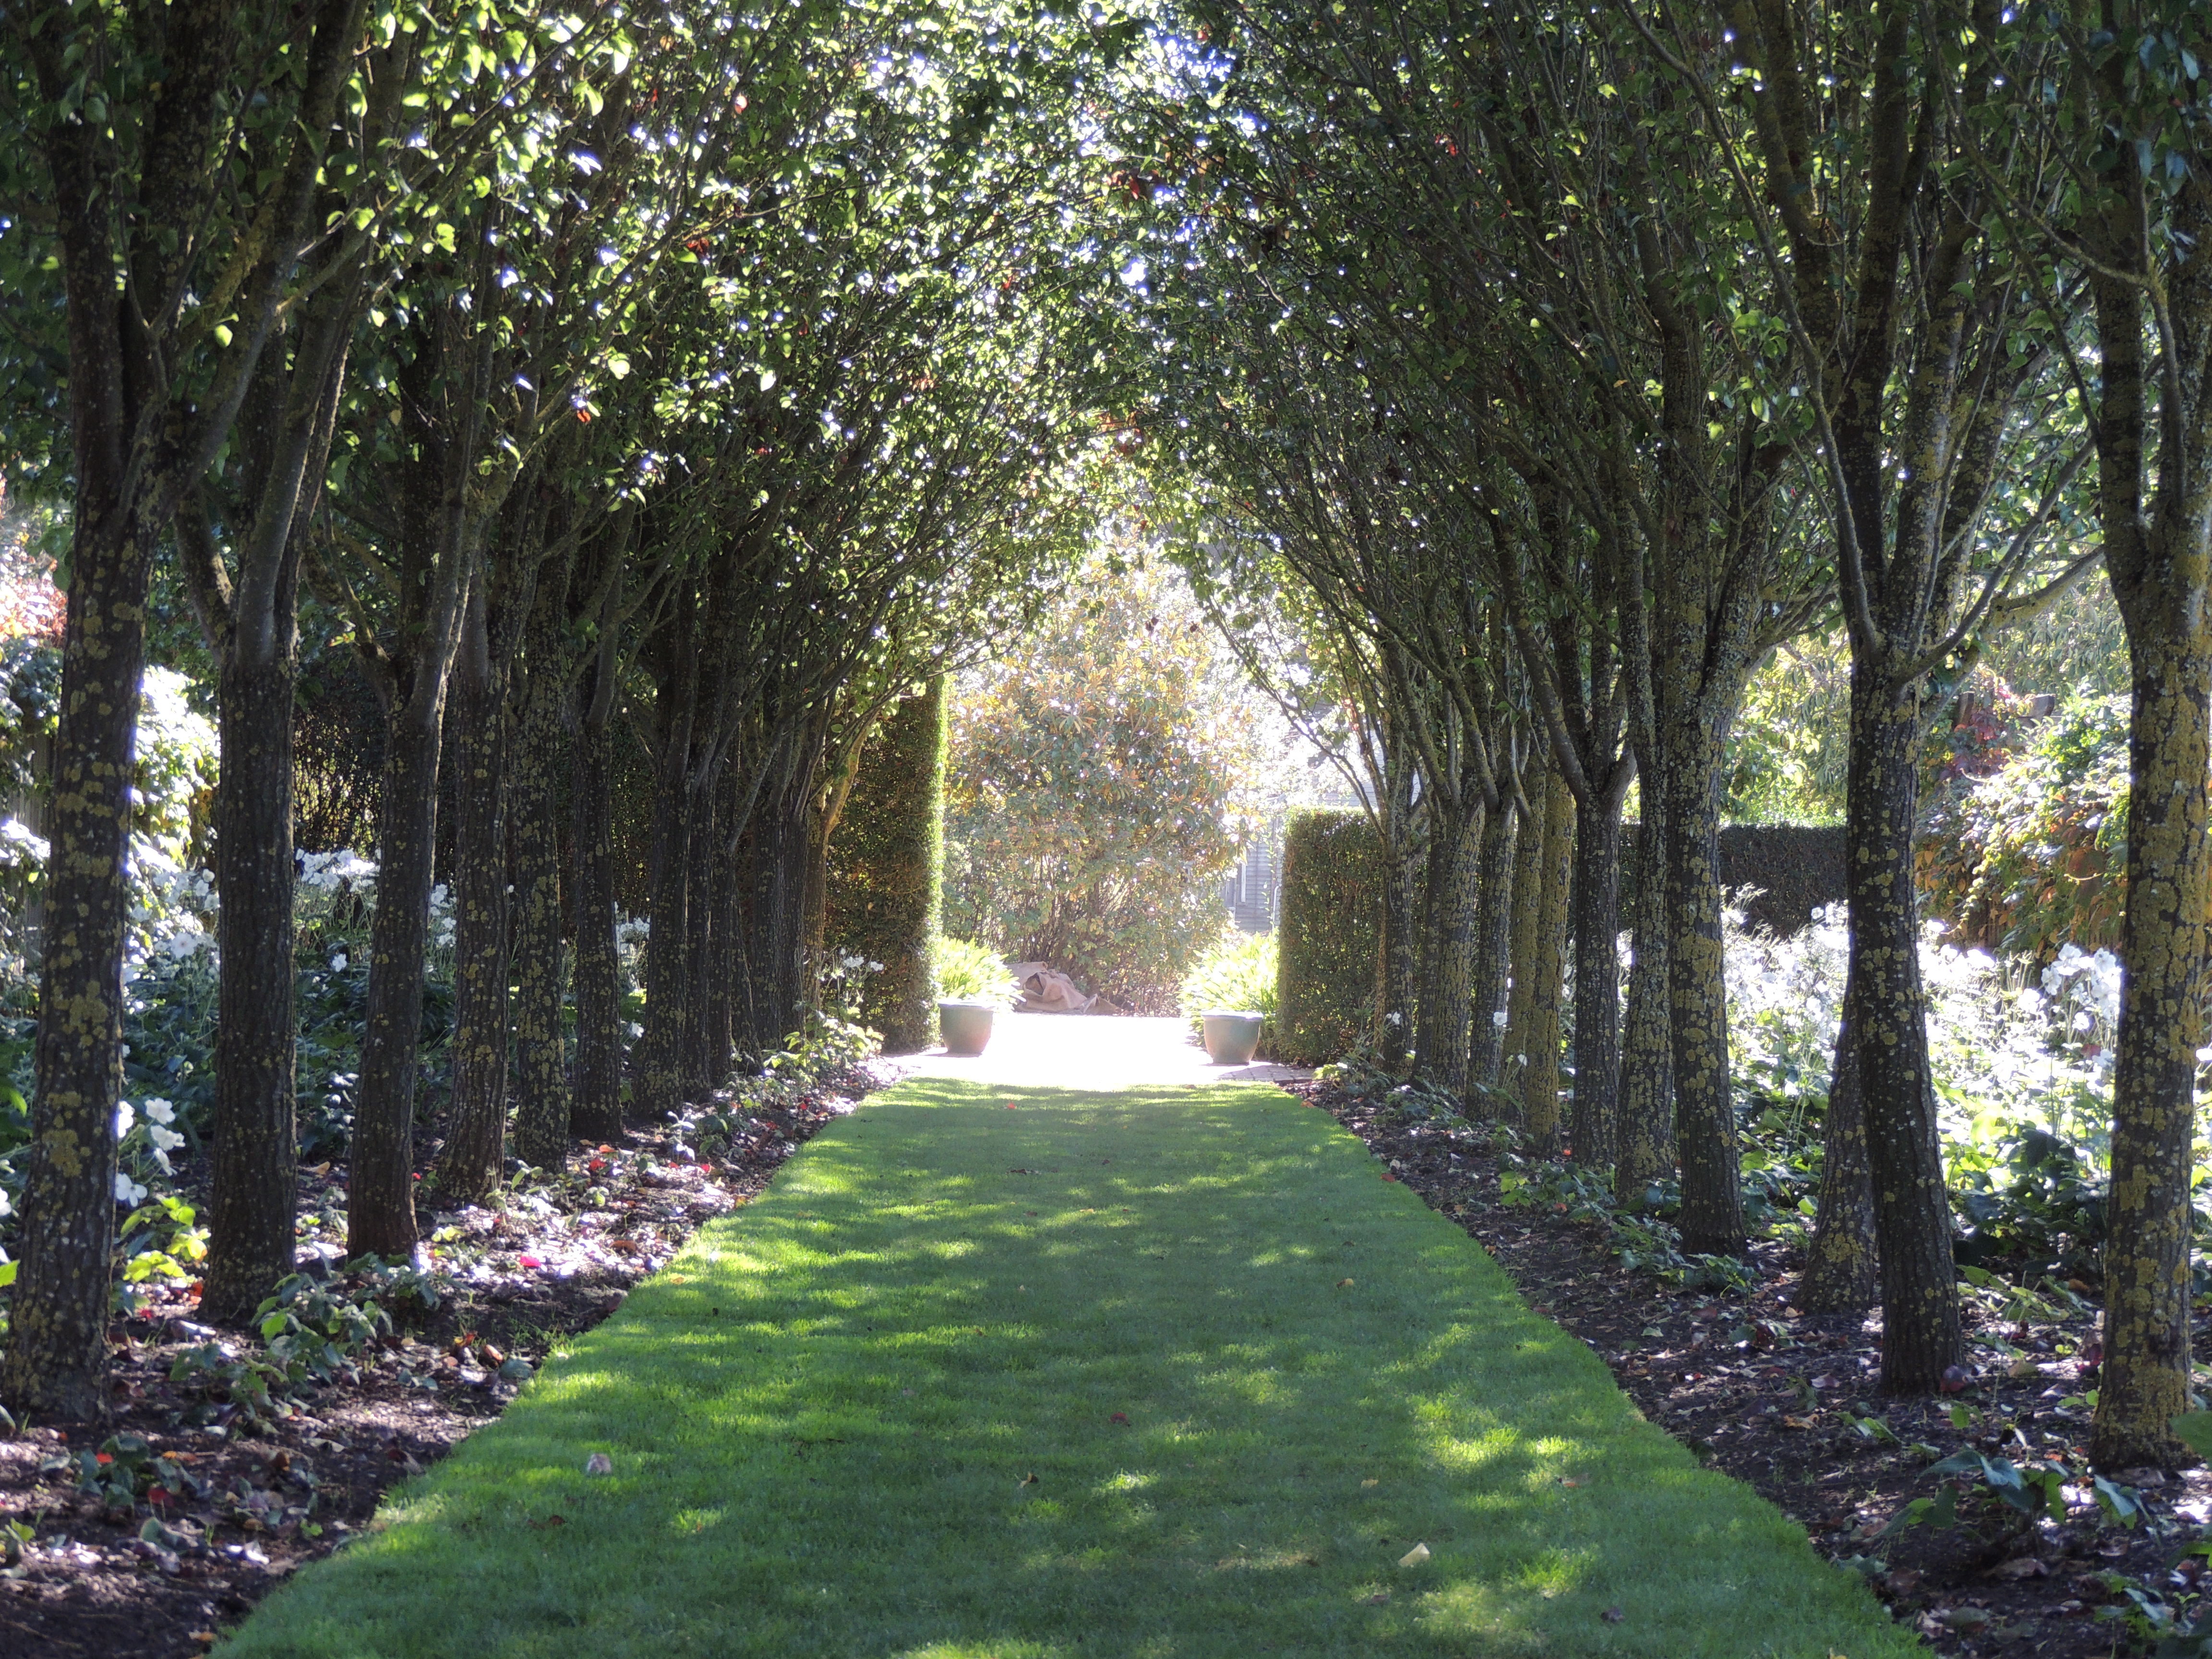 The pear walk, planted with Pyrus Calleryana, has an underplanting of white Japanese anemones and a beautifully kept grassy sward. Look how the sun dapples through the leaves onto the path.